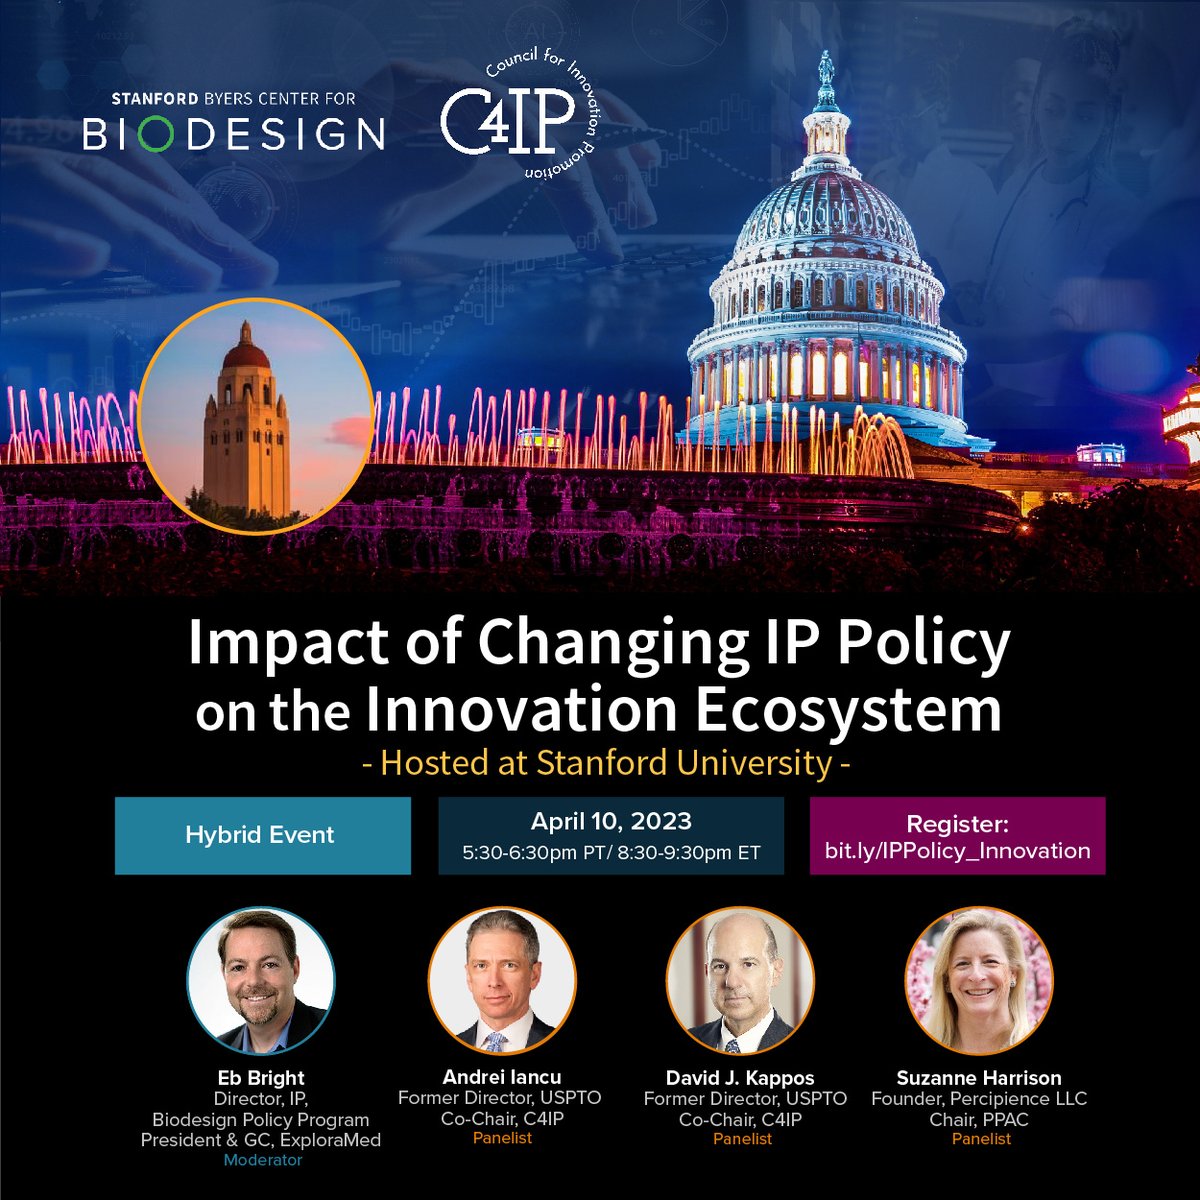 Many critical areas of patent law are being hotly debated. Join us on April 10 as we host a discussion with @Council4IP on the role IP law and policy play in supporting innovation. Register here ow.ly/FnCC50NsZtc #StanfordBiodesignPolicyProgram #InnovationandIP